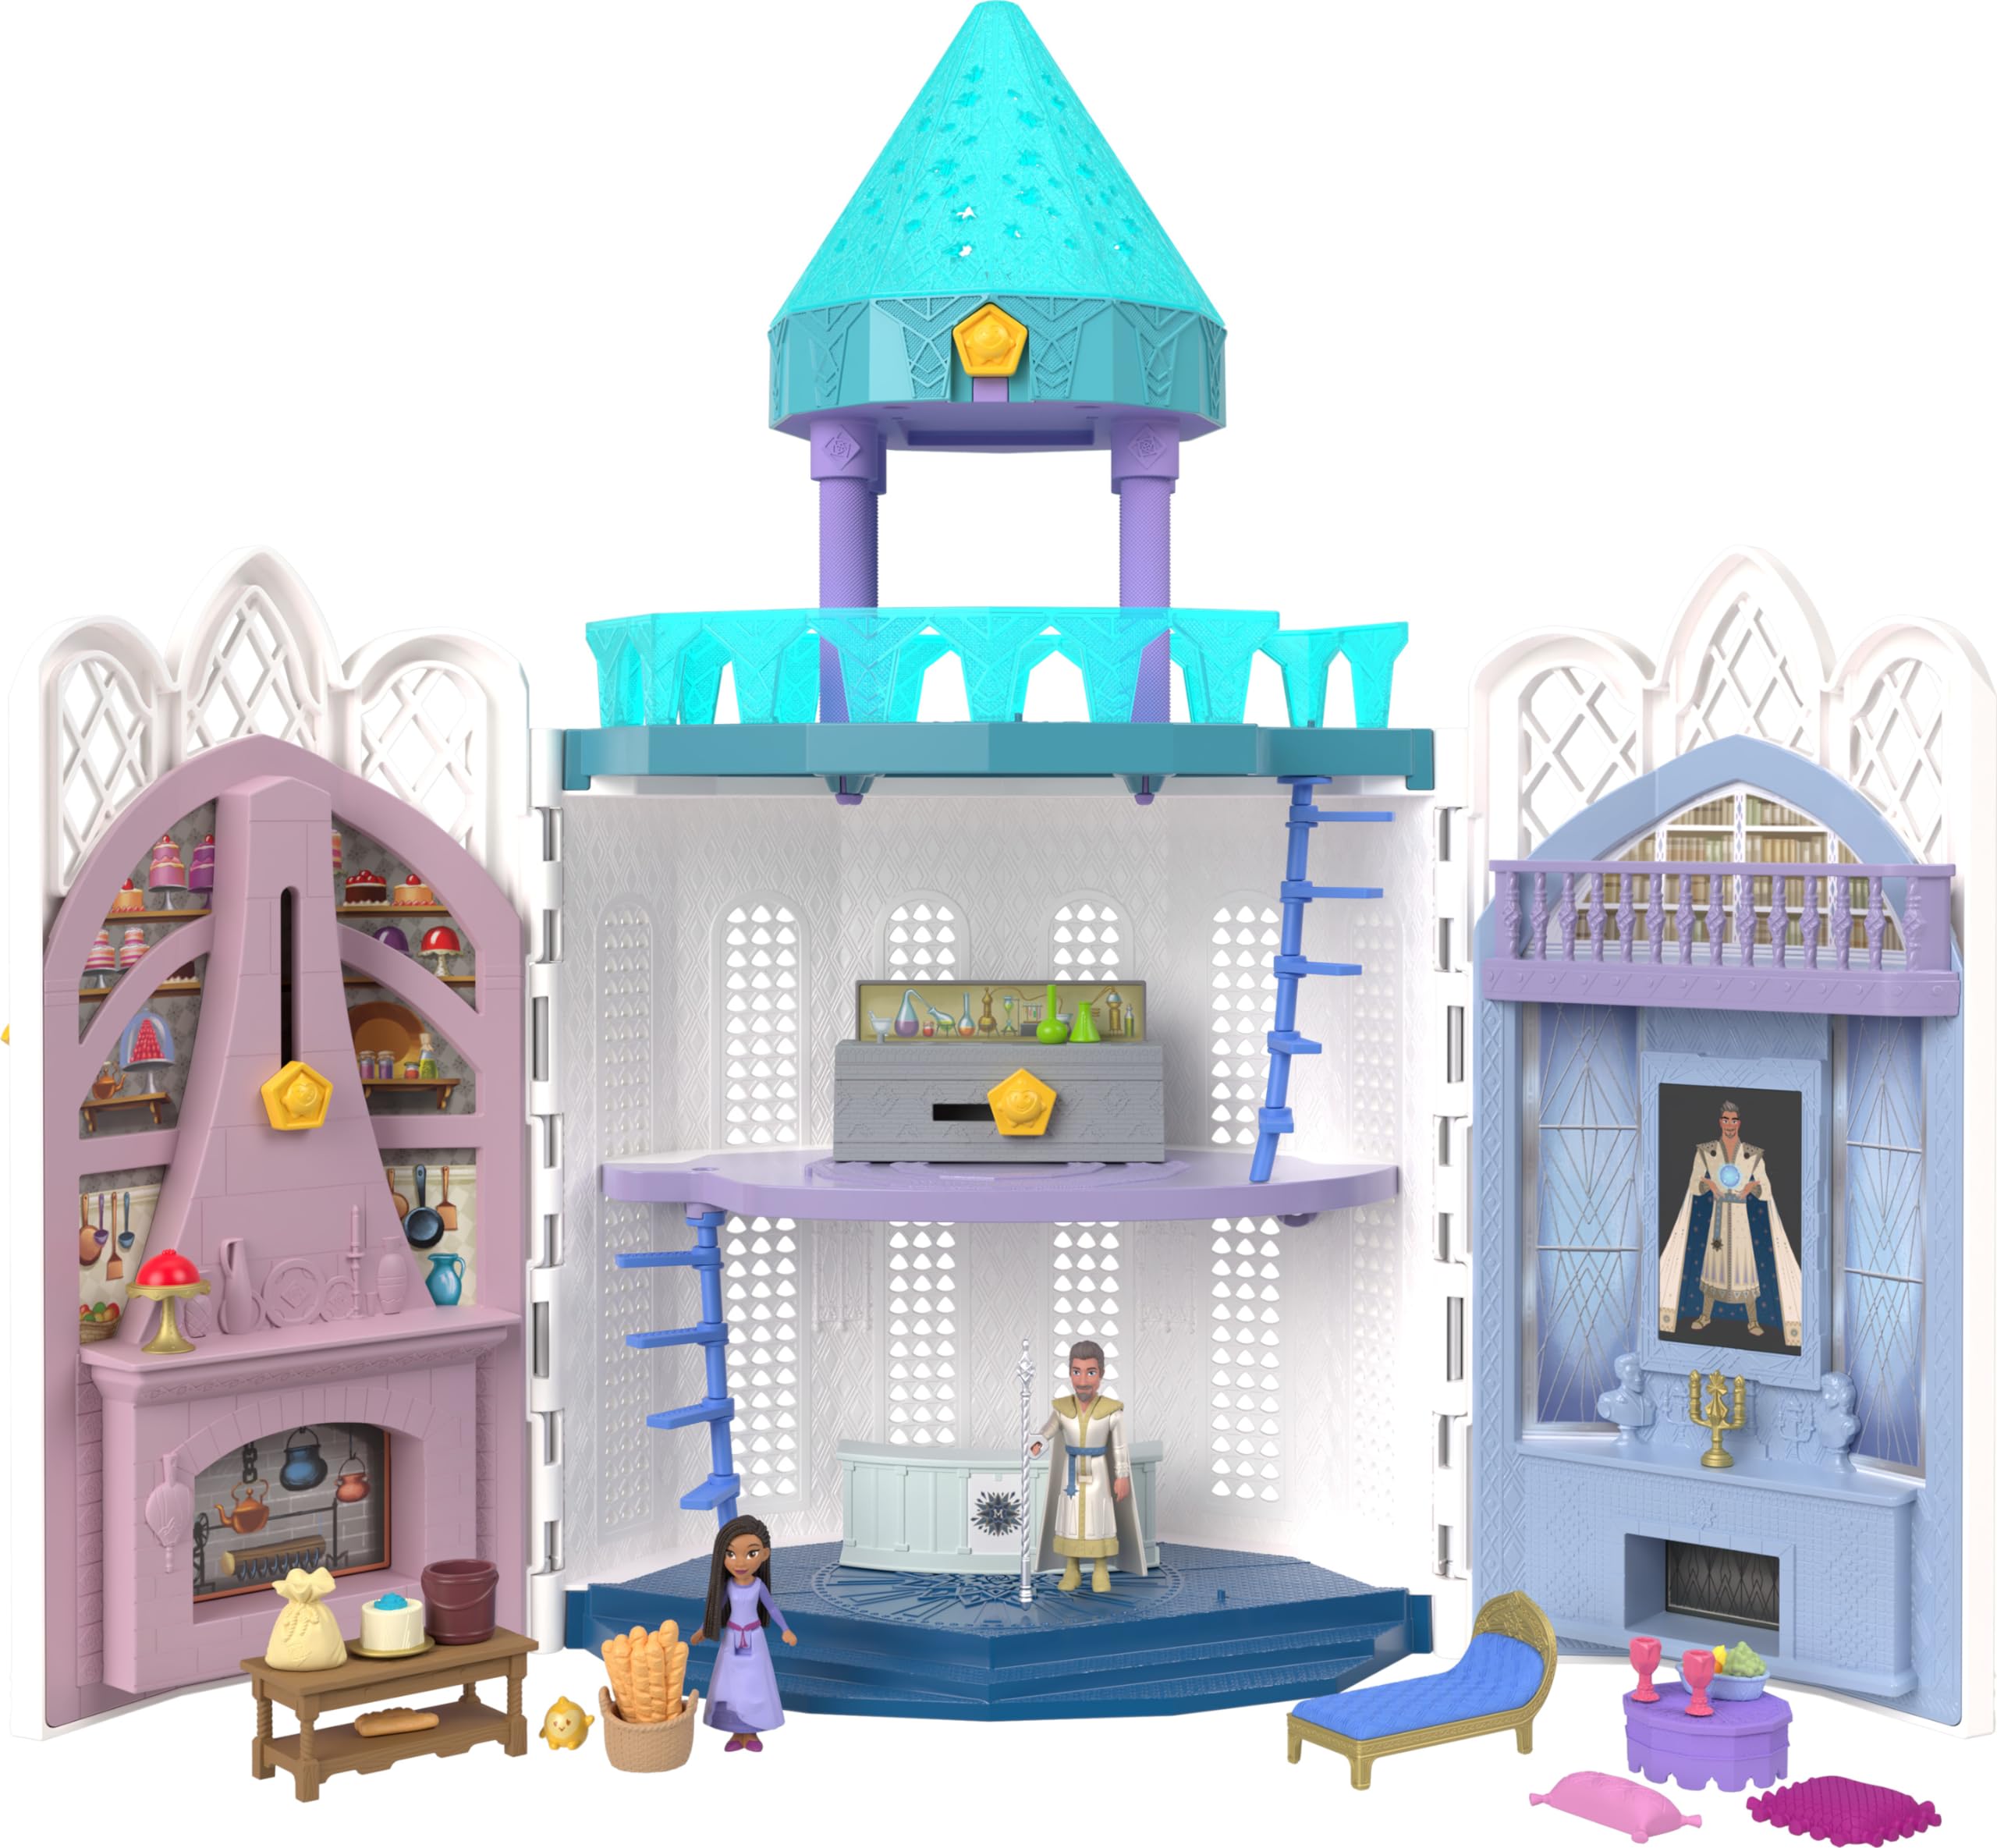 Mattel Disney's Wish Rosas Castle Dollhouse Playset with 2 Posable Mini Dolls, Star Figure, 20 Accessories, Light-Up Projection Dome & More